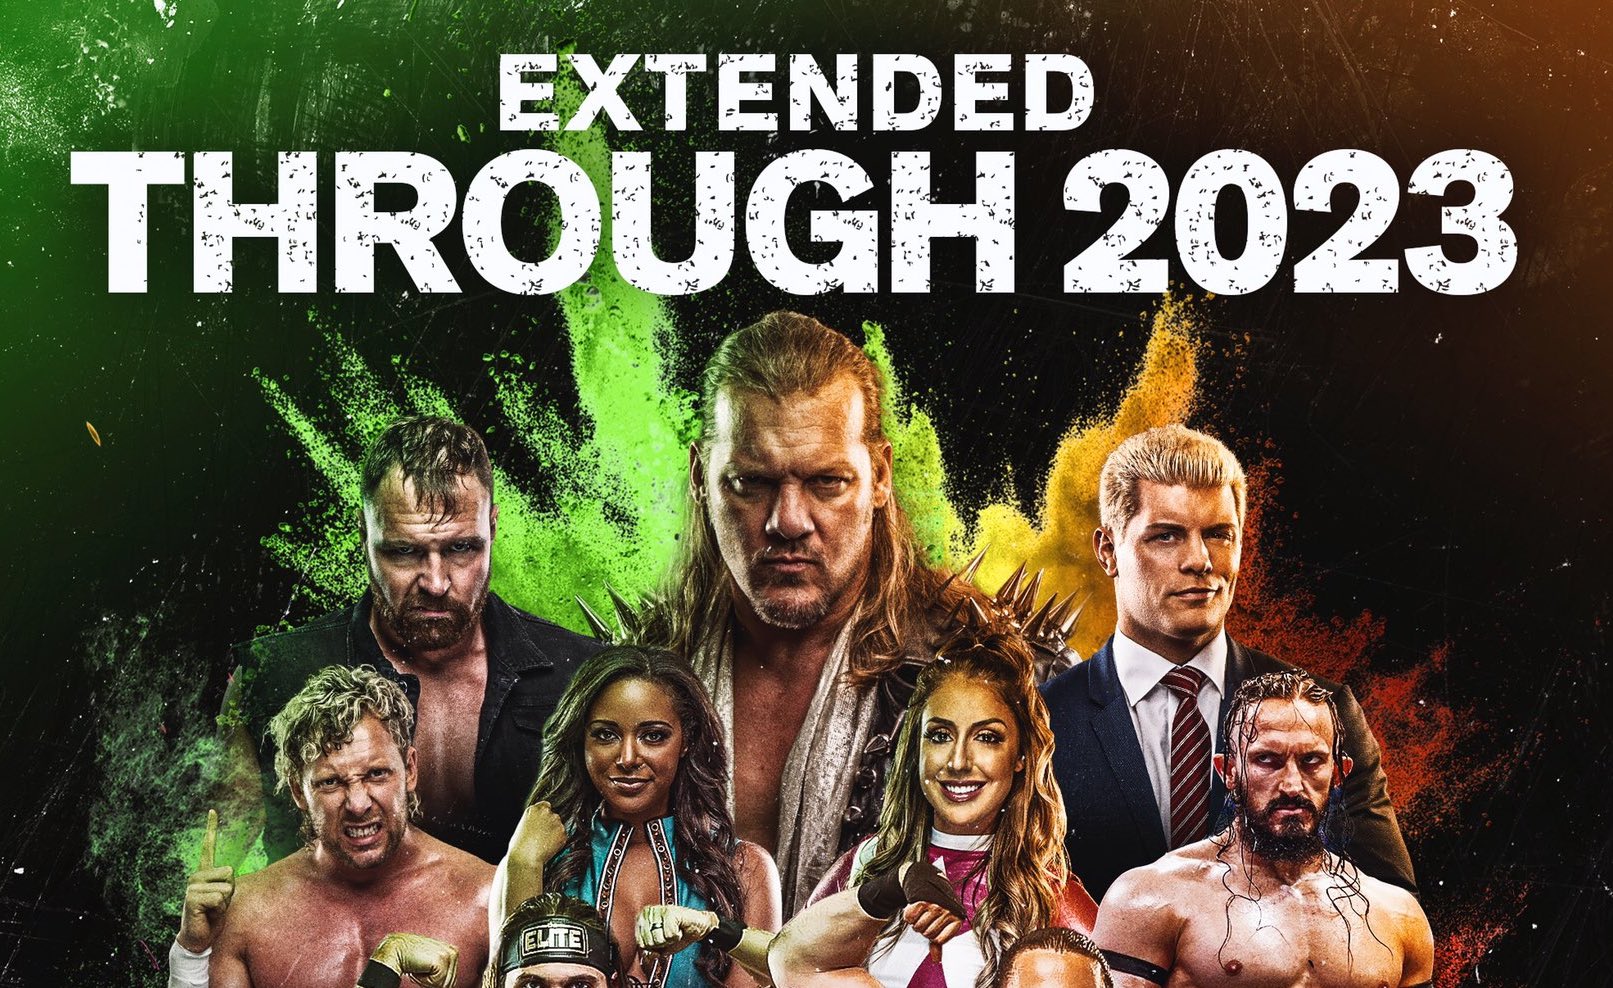 AEW announces second weekly show; Dynamite extended through 2023